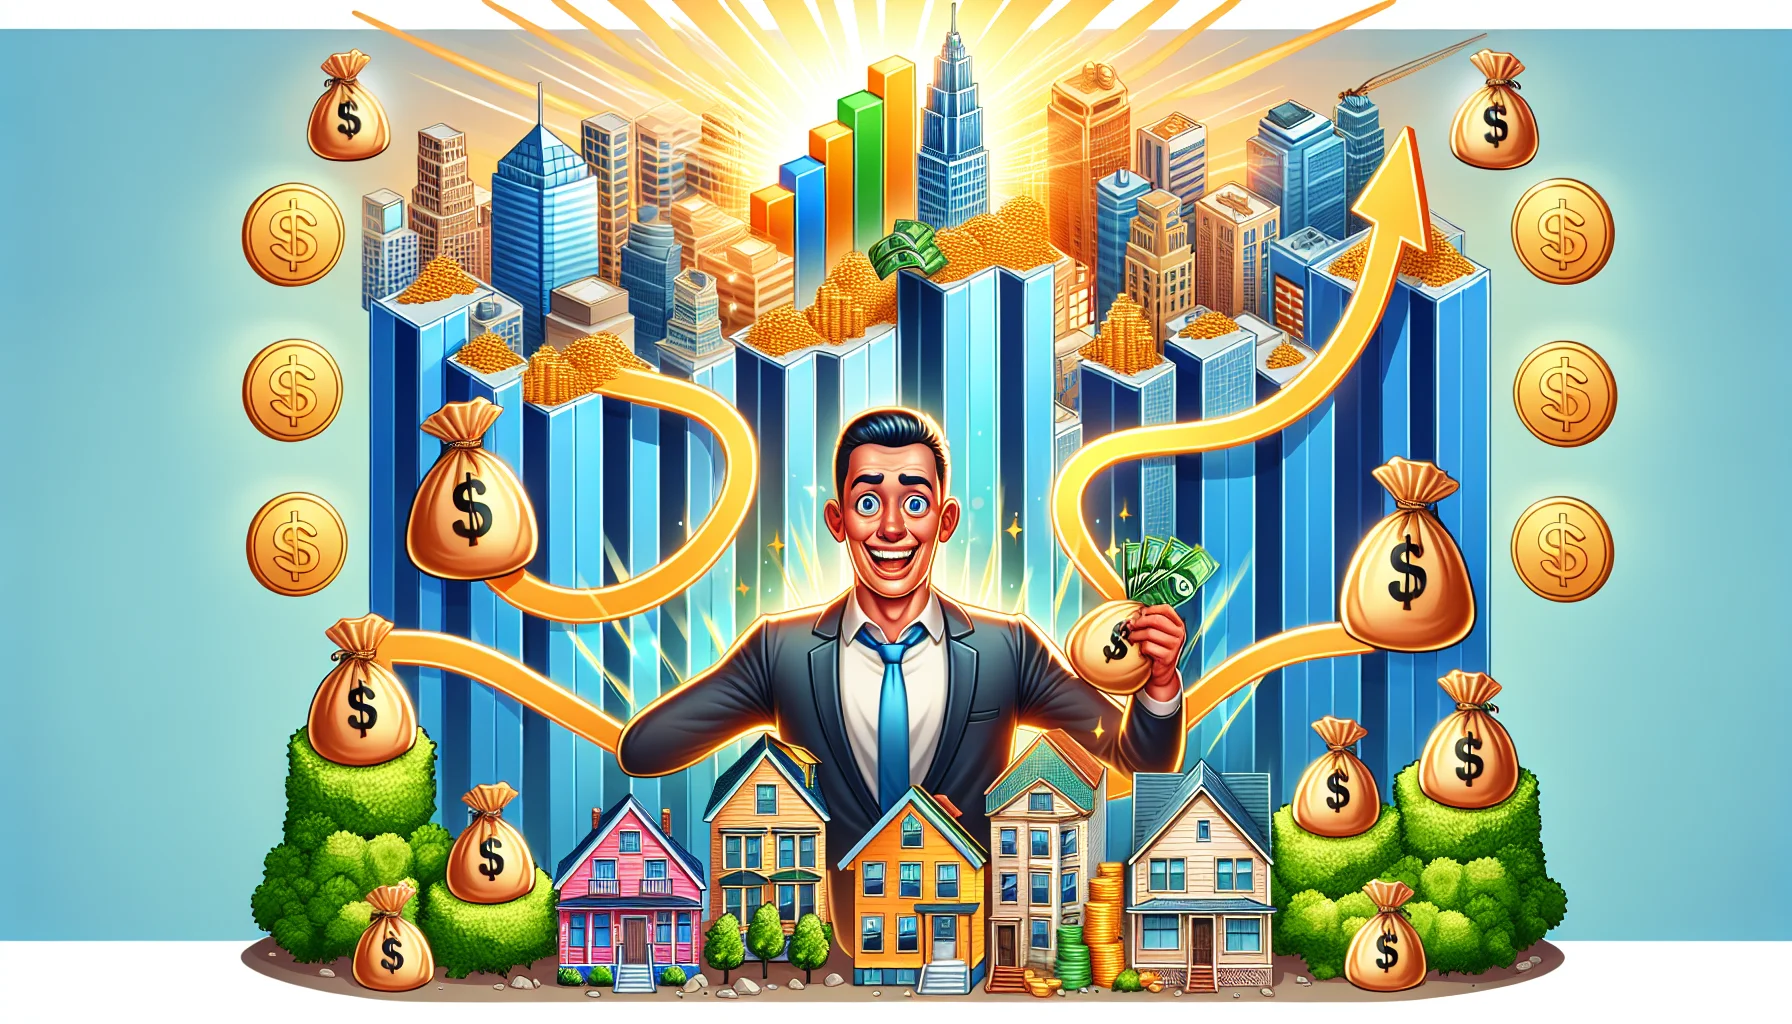 Create a humorous and realistic visual representation of an ideal scenario in real estate investing. The image can depict a vibrant cityscape with various types of property - from residential houses to commercial skyscrapers - emanating golden glow to signify high value. There should be arrows indicating a flow from an investor, a middle-aged Caucasian male, holding bags of money towards these buildings and then the arrows return with more bags of money. Intermingle all of this with cartoon-style indicators such as increasing bar graphs, dollar signs, and happy faces to add a funny twist to the scenario.